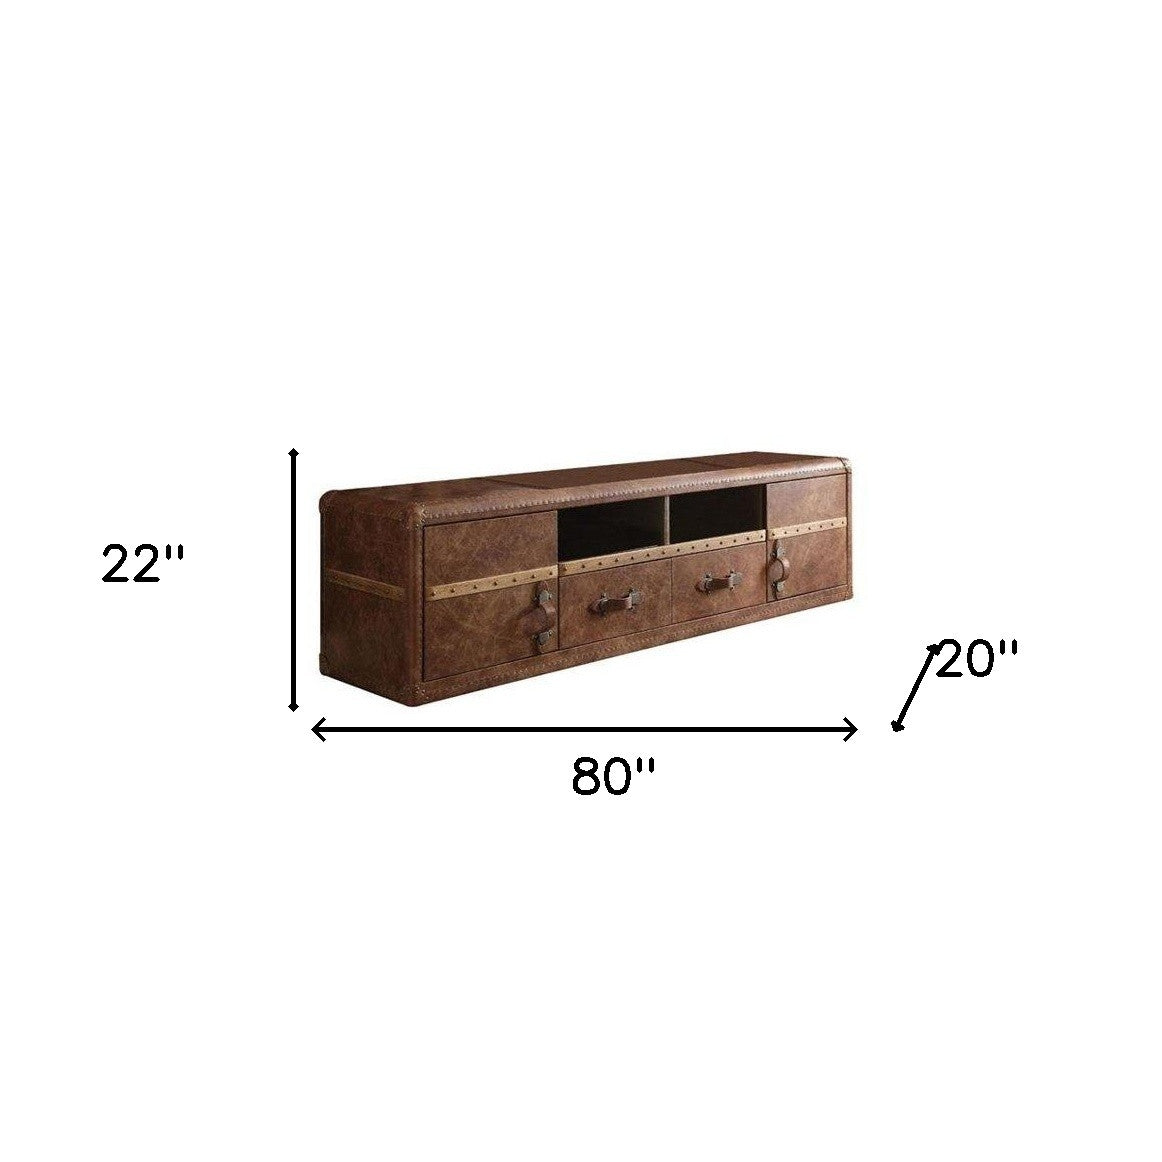 80" Brown Leather Cabinet Enclosed Storage TV Stand